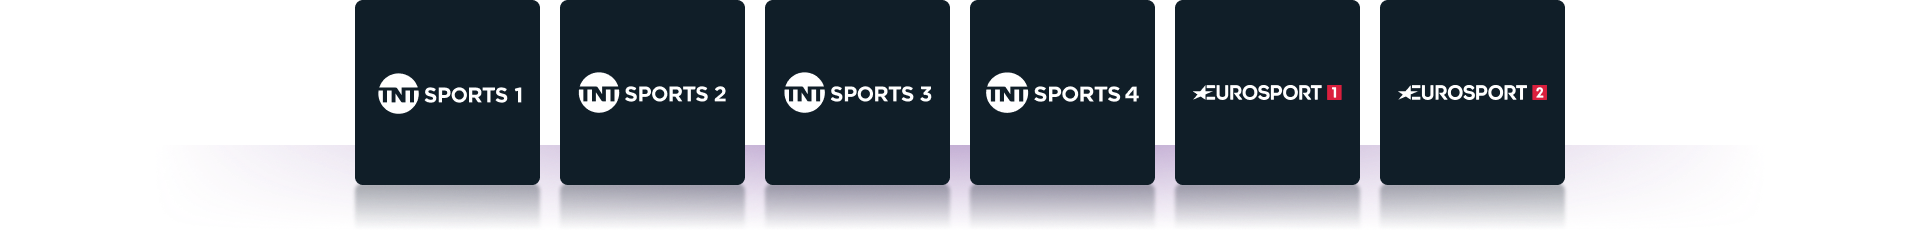 What channels does TNT Sports offer?